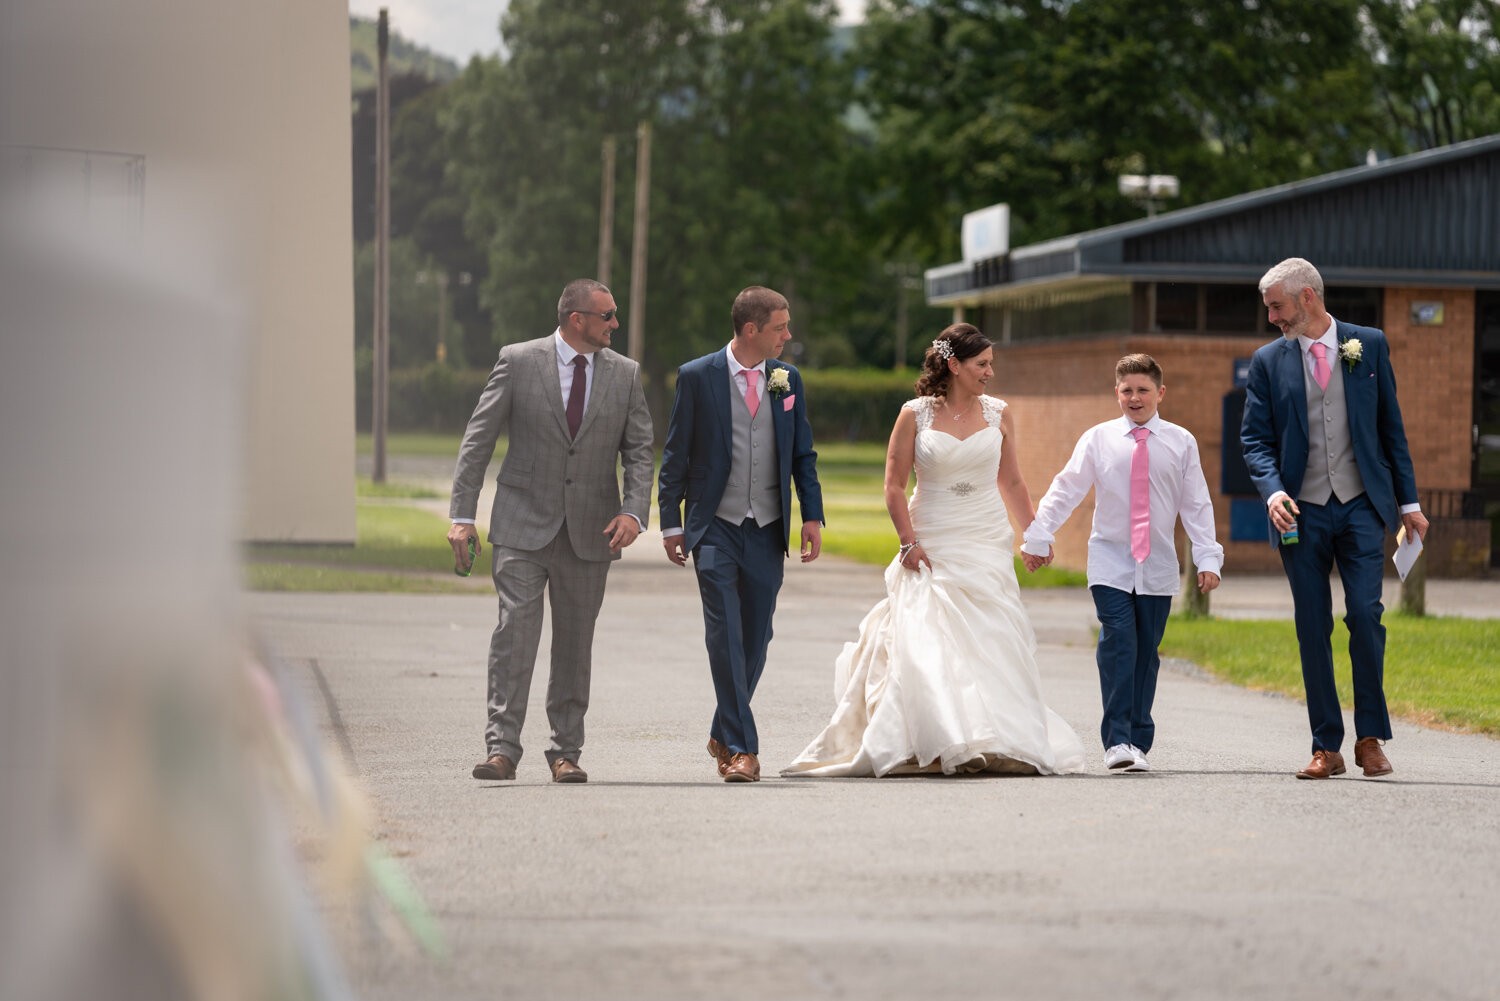 Bride, groom and guests walking to ceremony